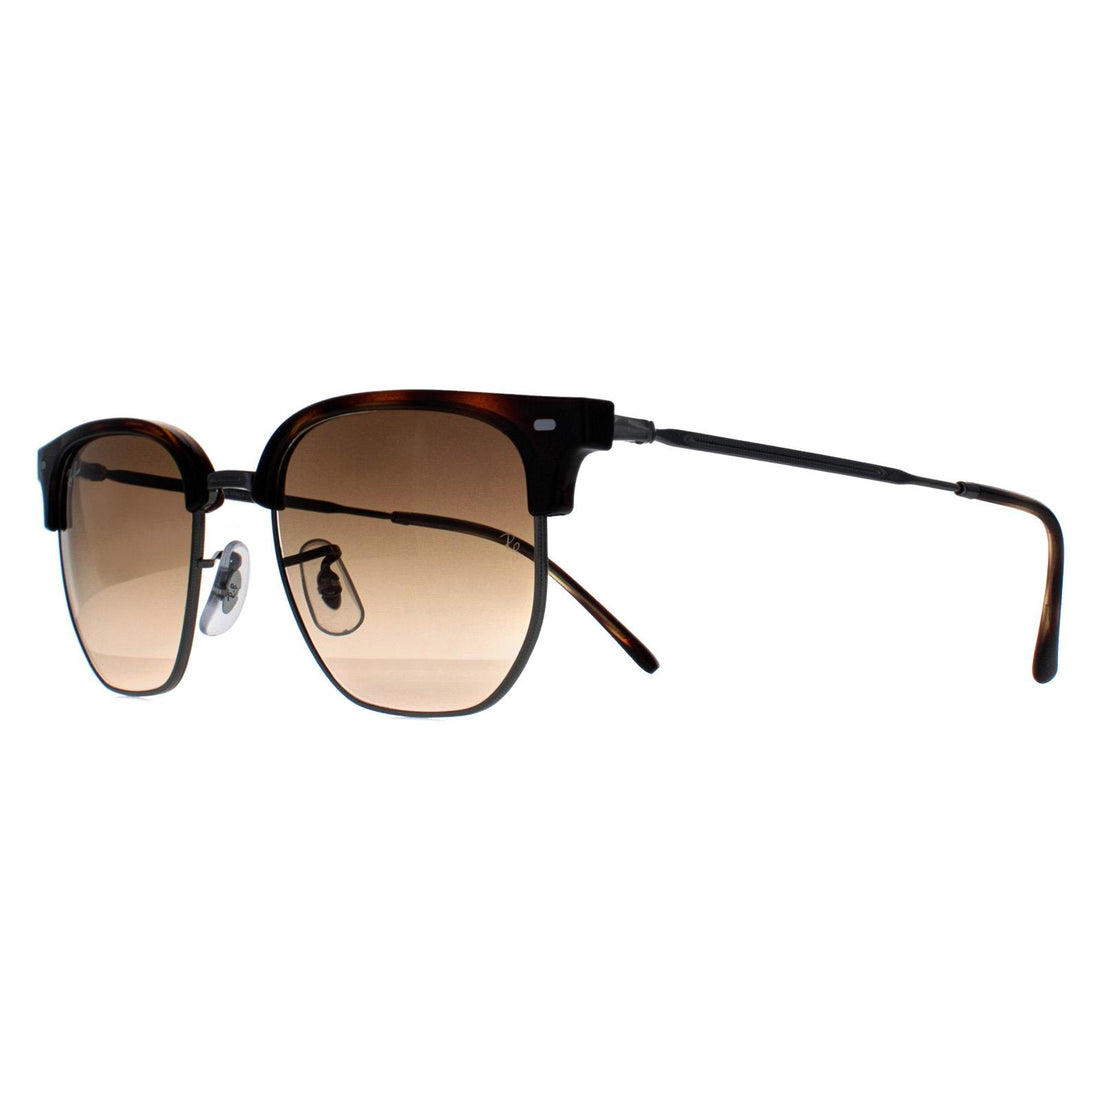 Ray-Ban Sunglasses RB4416 New Clubmaster 710/51 Havana Brown Gradient